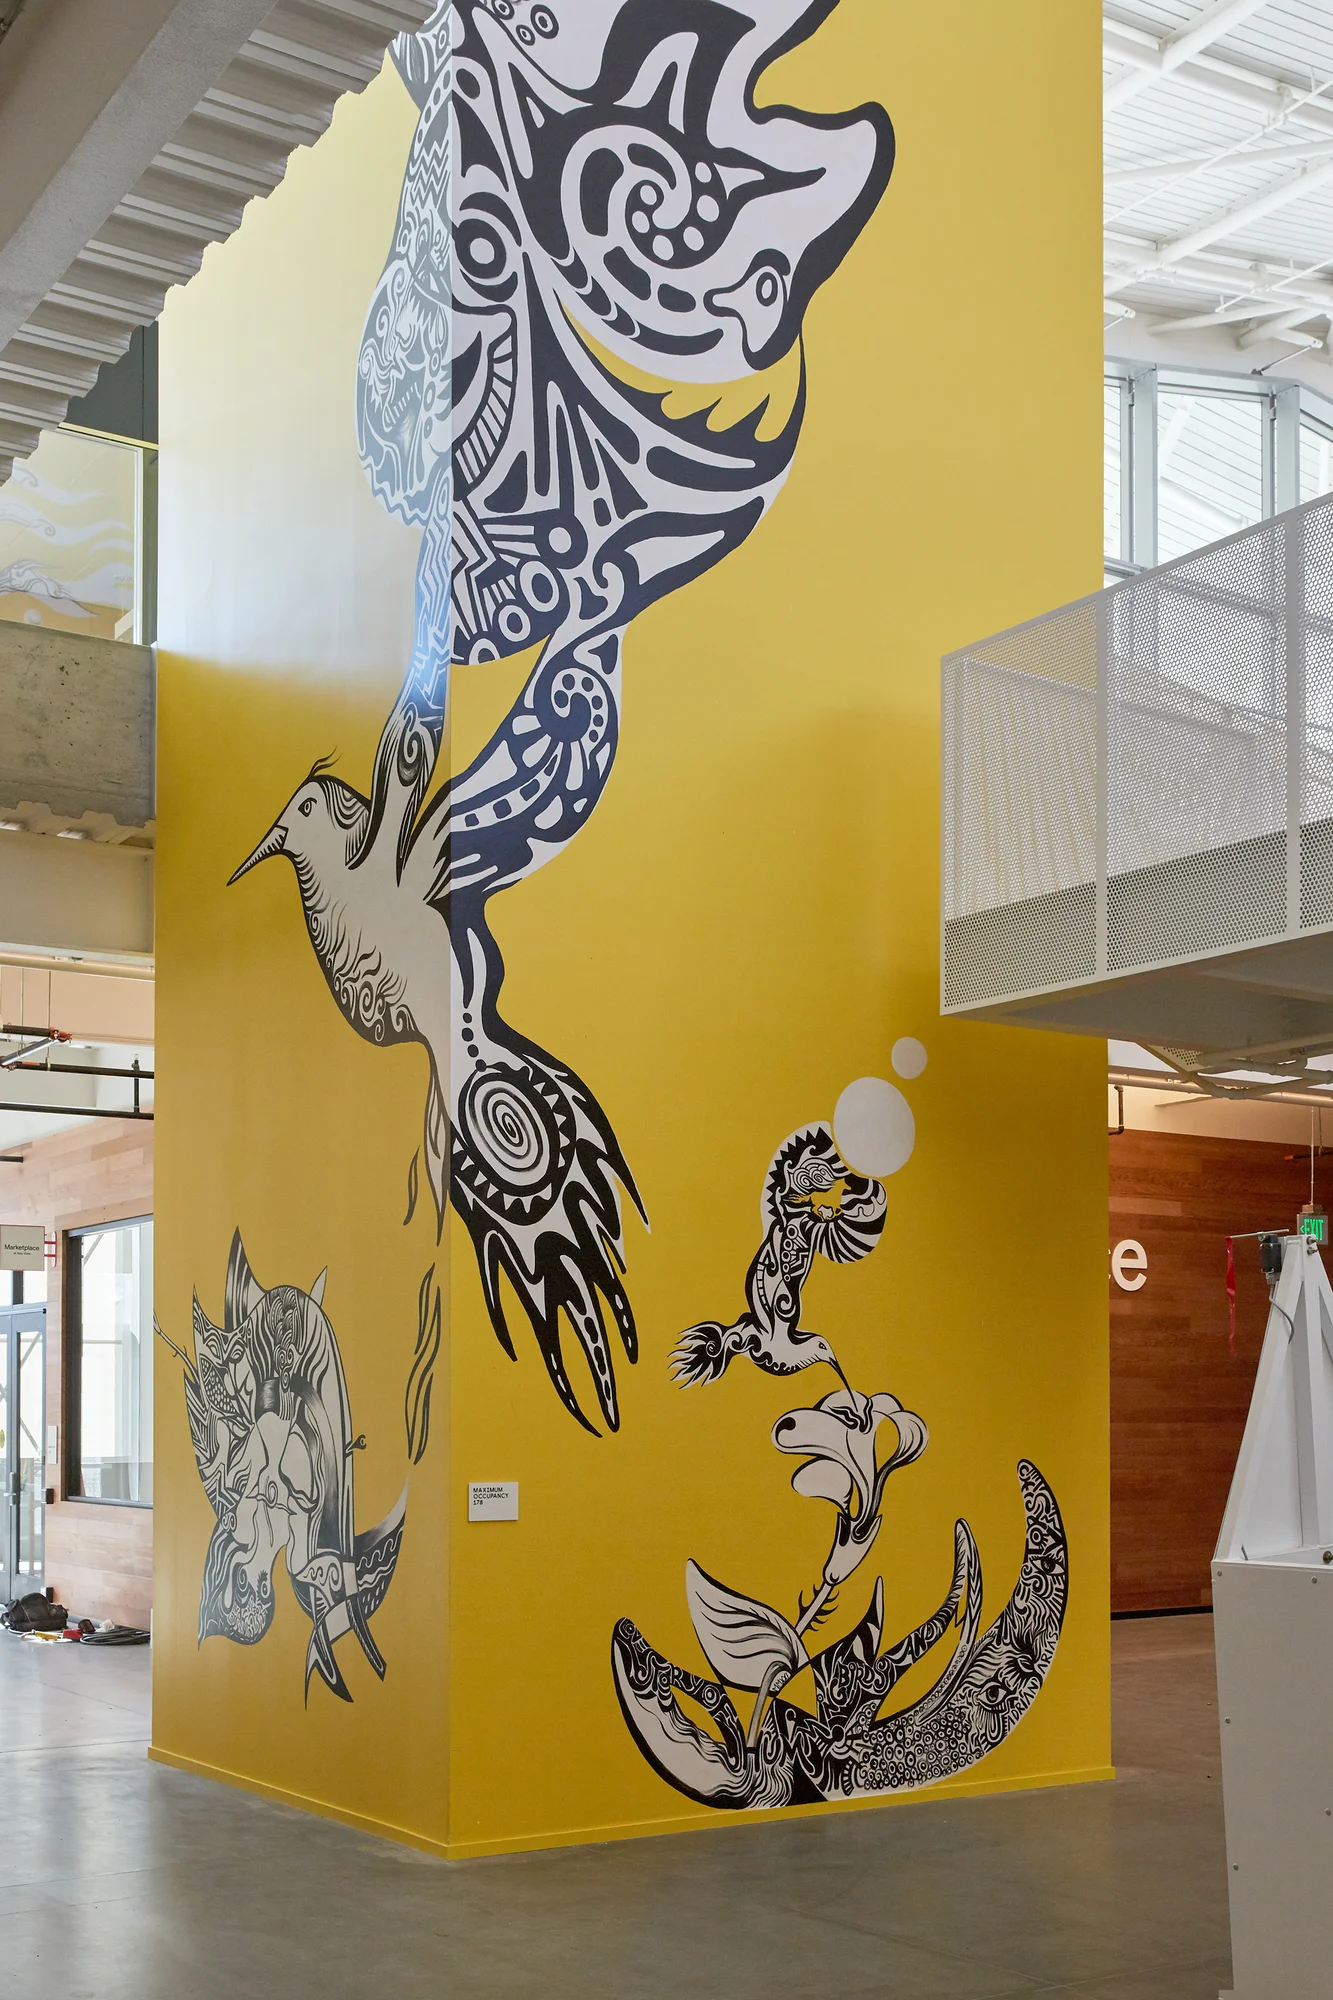 A photograph of the mural showing a yellow background with black and white drawings of hummingbirds.